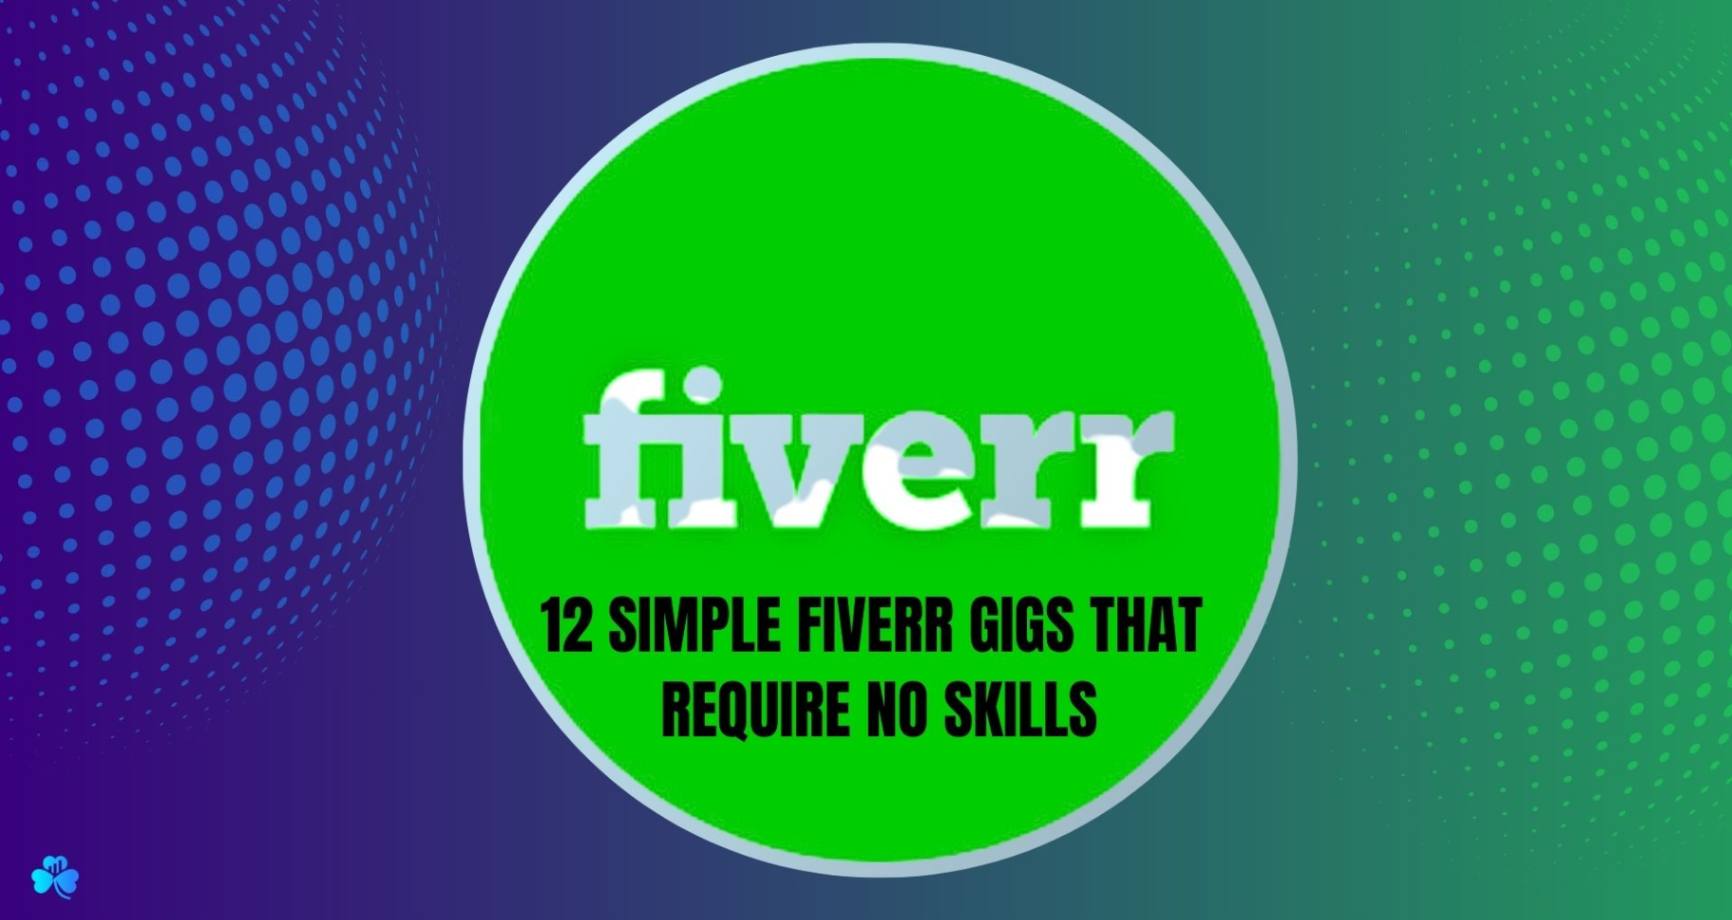 Fiverr gigs that require no skills